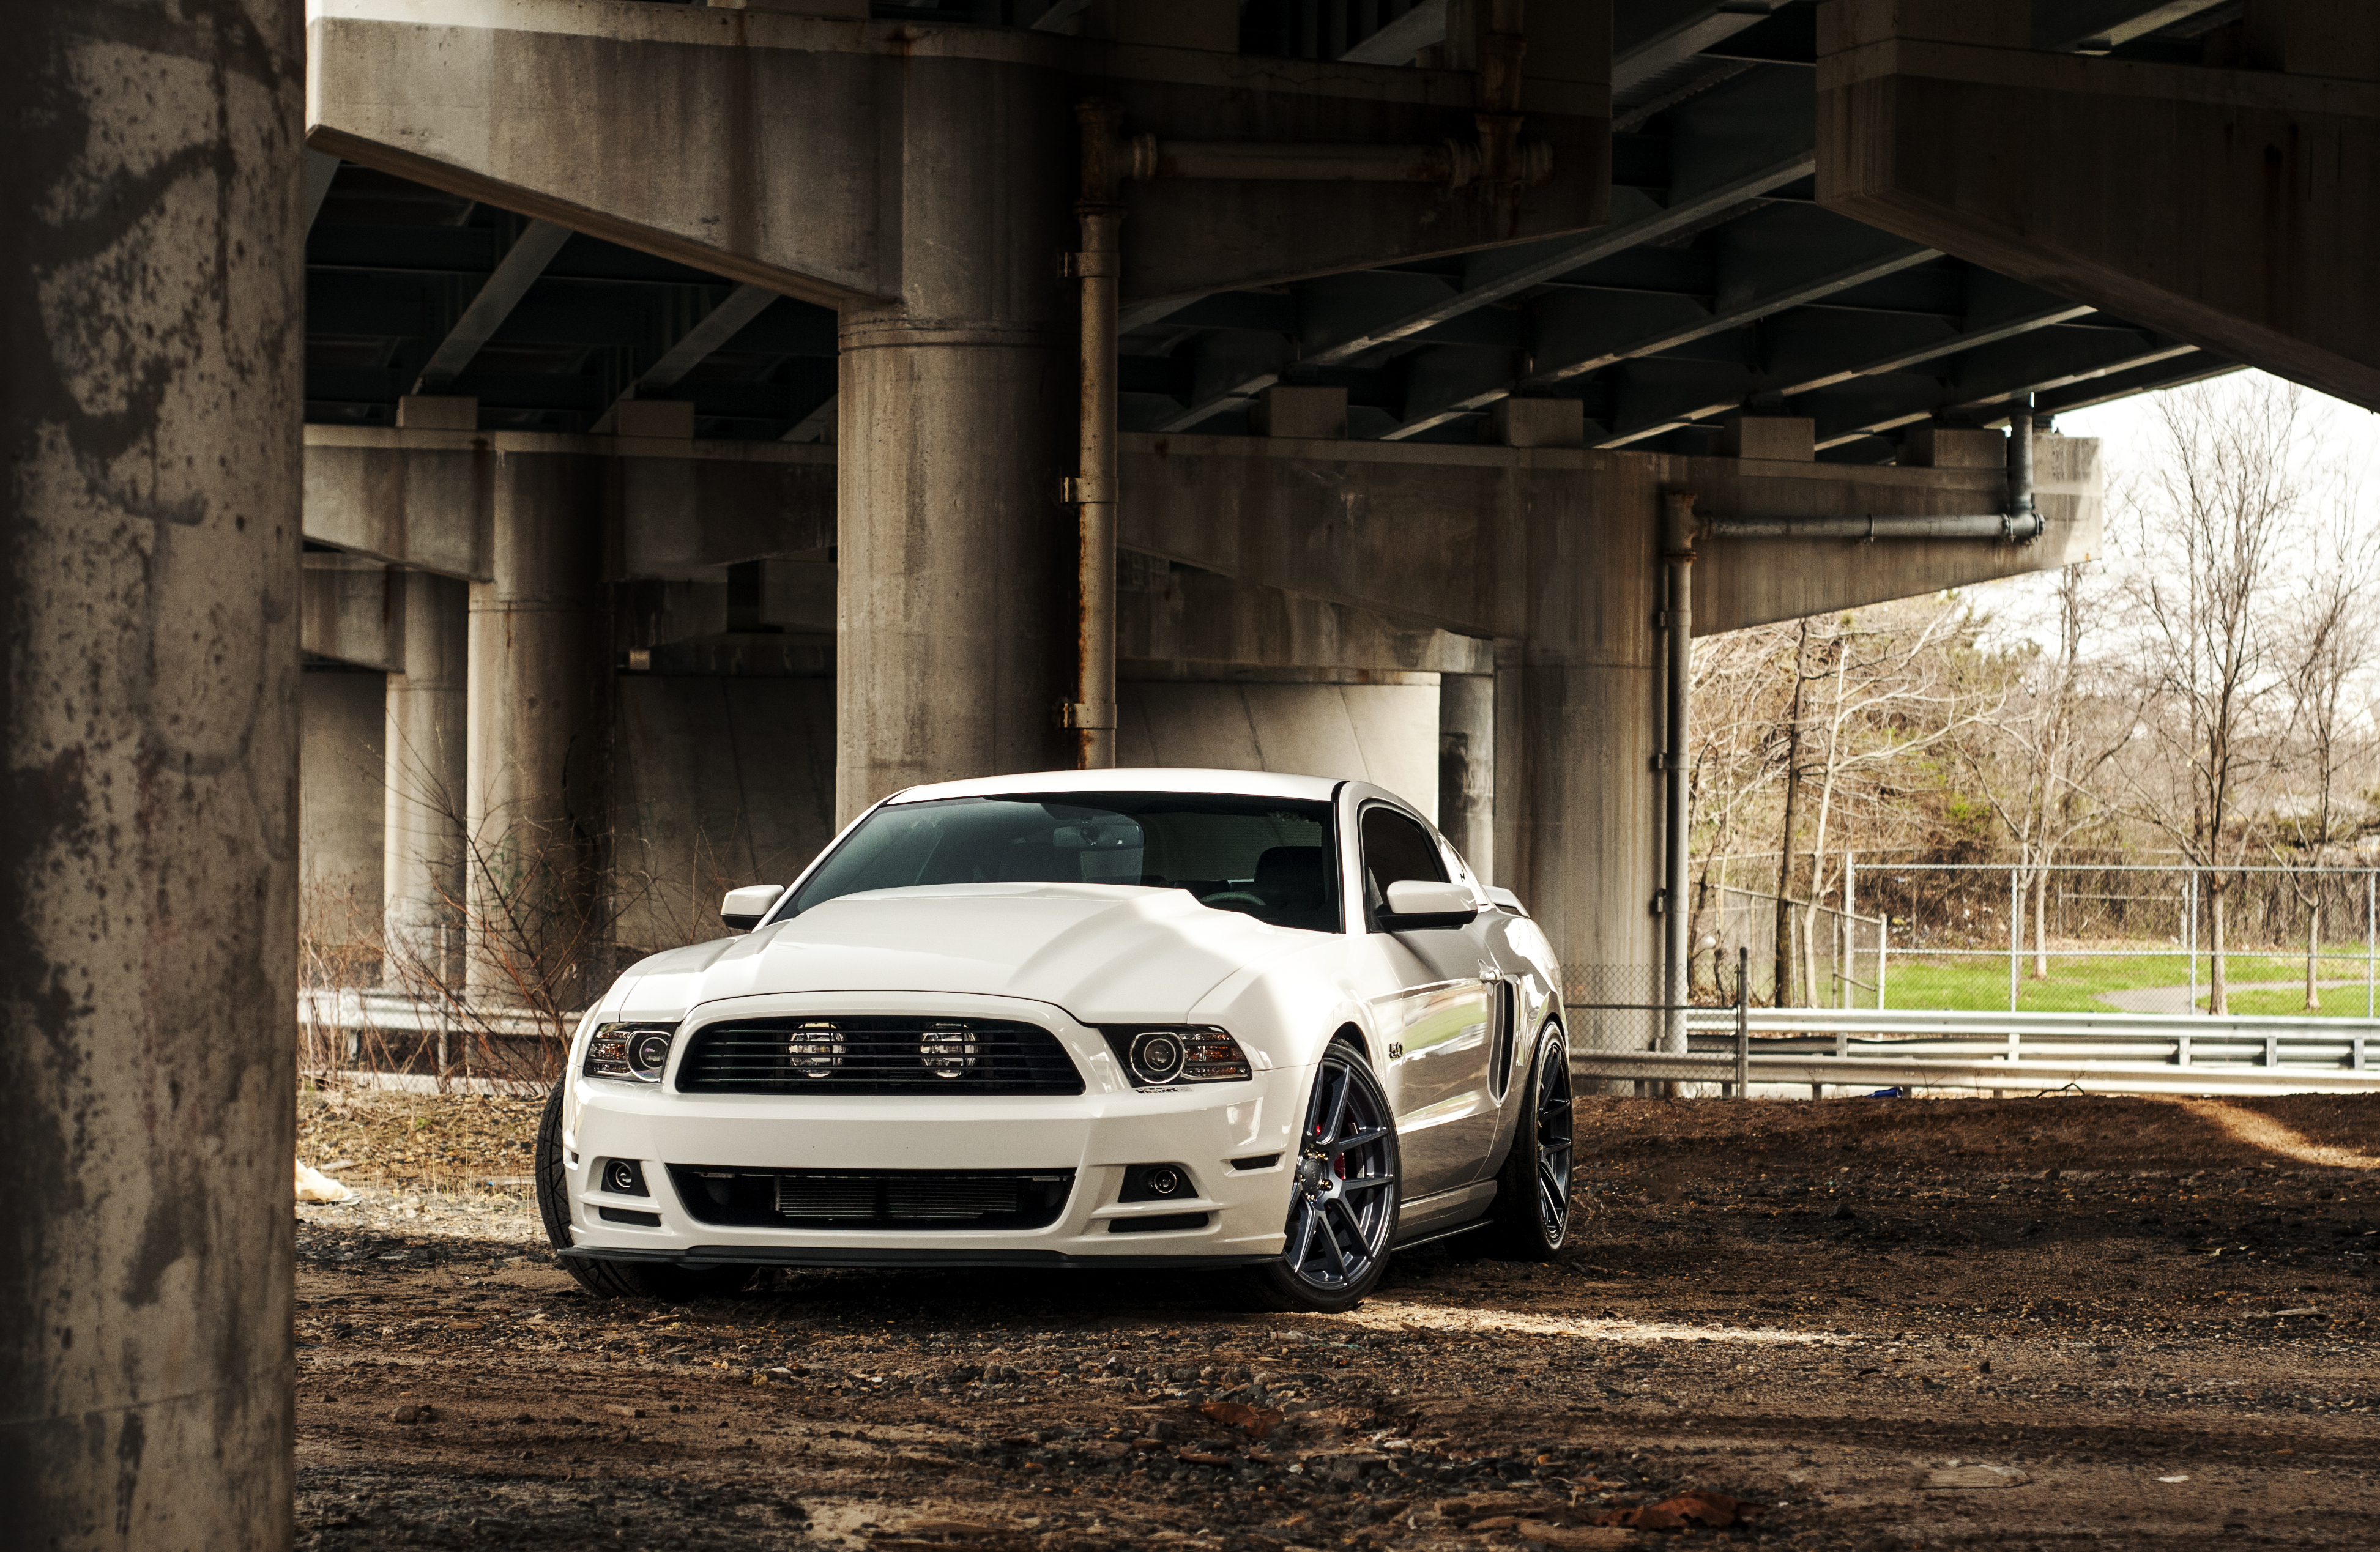 ford mustang, ford, vehicles wallpaper for mobile